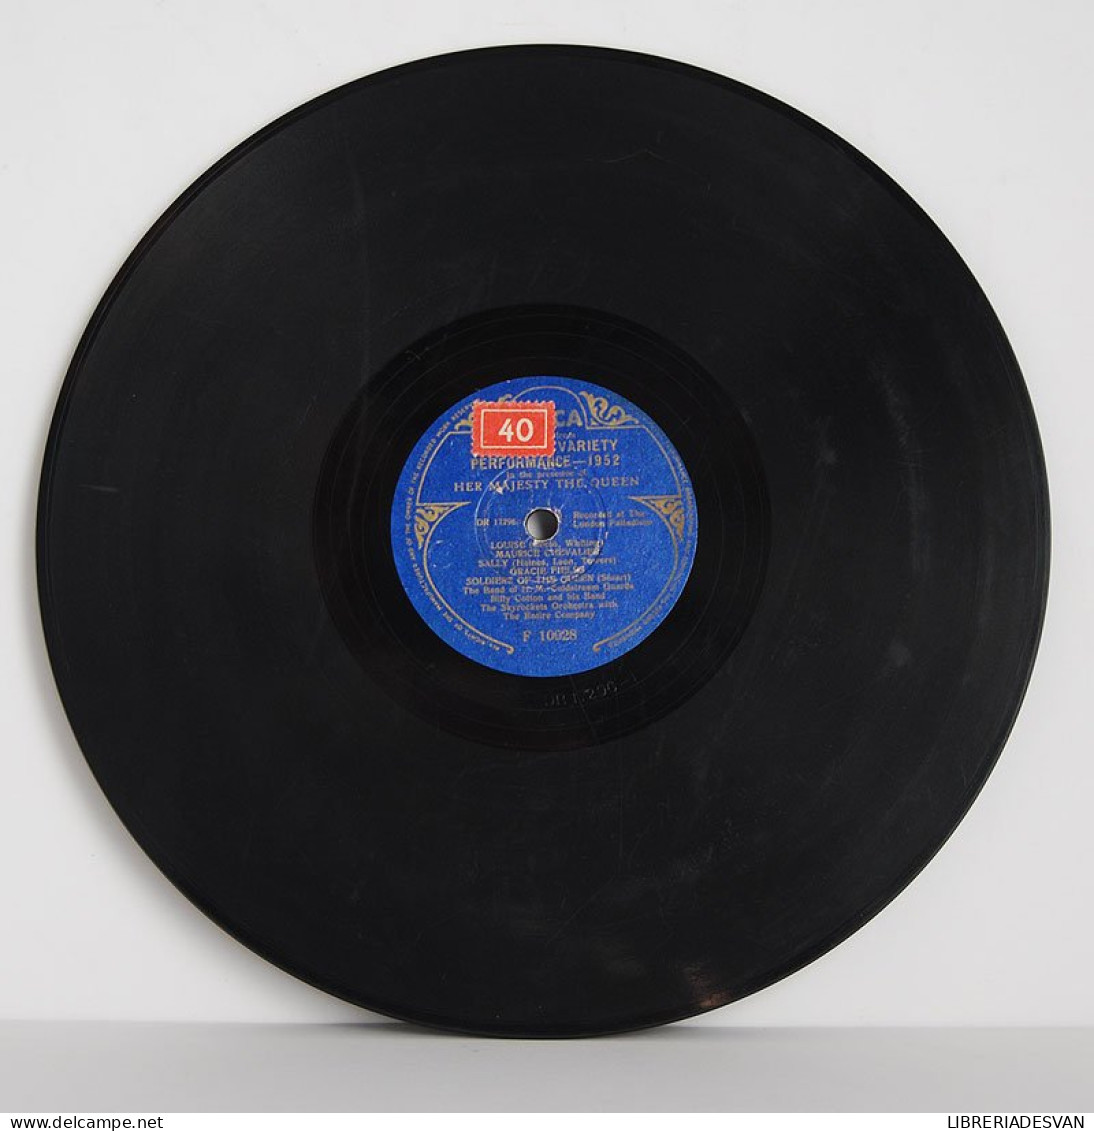 The Royal Variety Perfomance 1952. Her Majesty The Queen. Disco De Pizarra - 78 Rpm - Gramophone Records